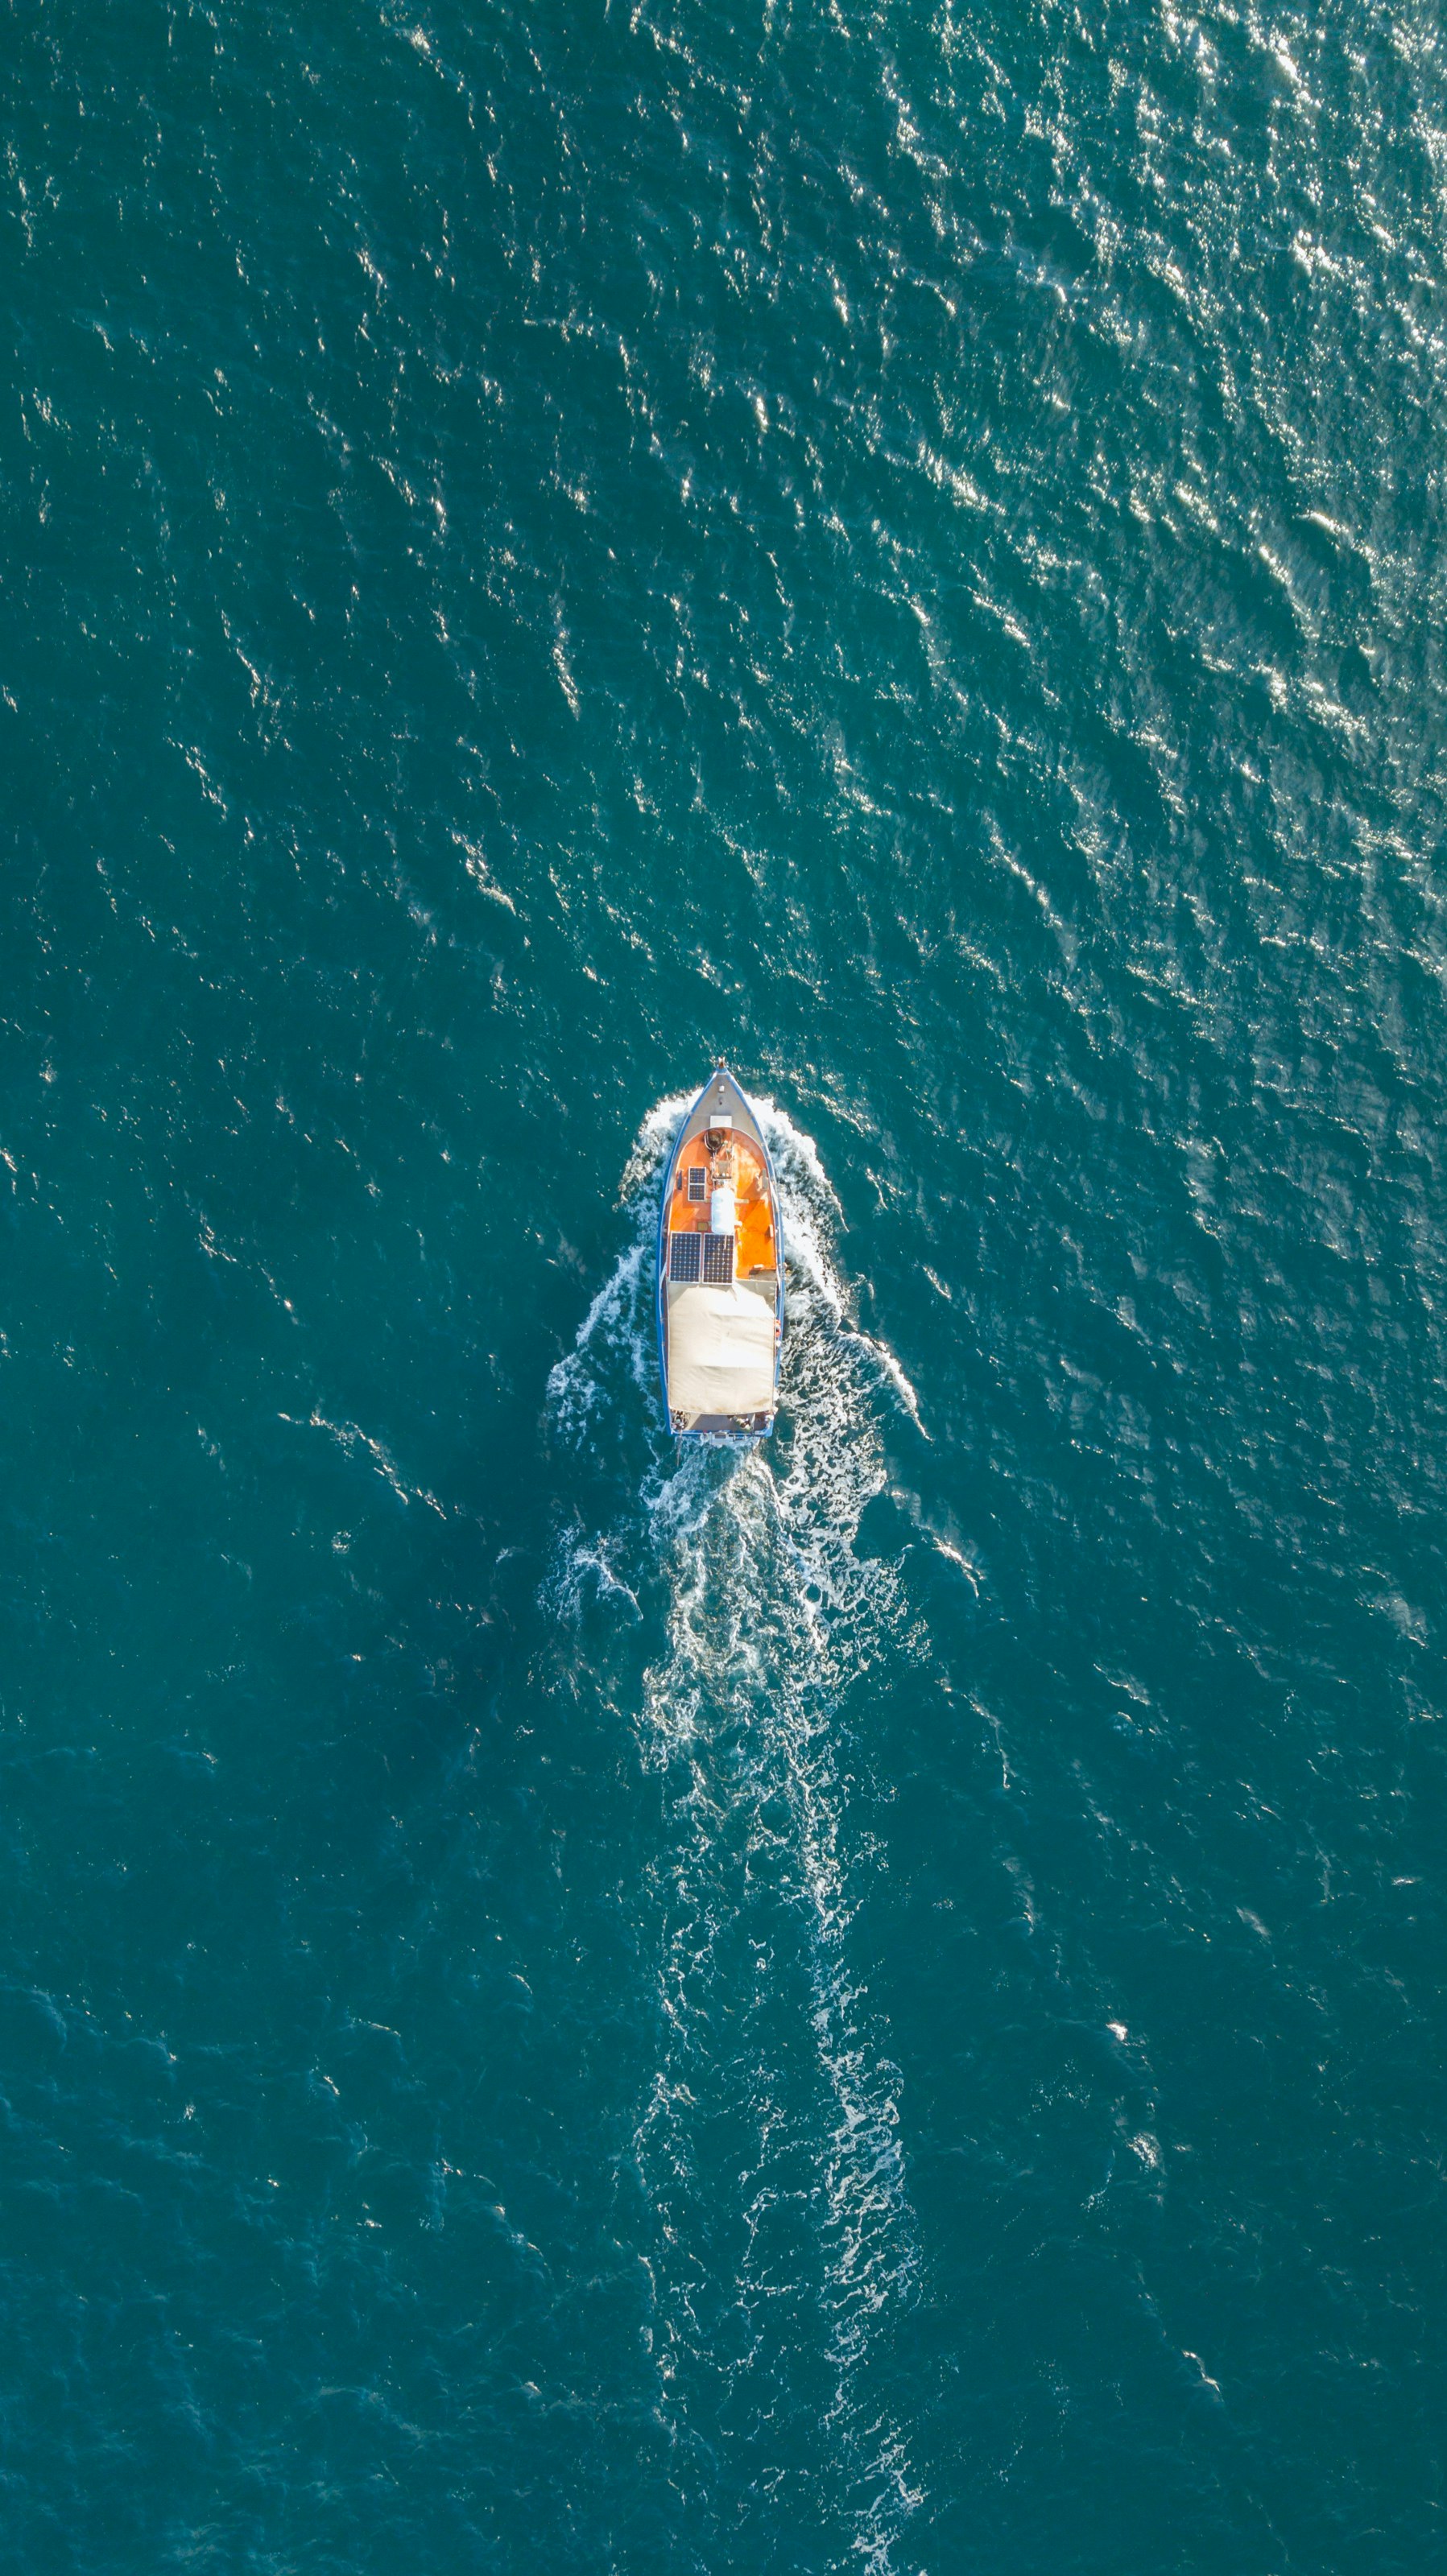 white and orange boat on blue sea during daytime